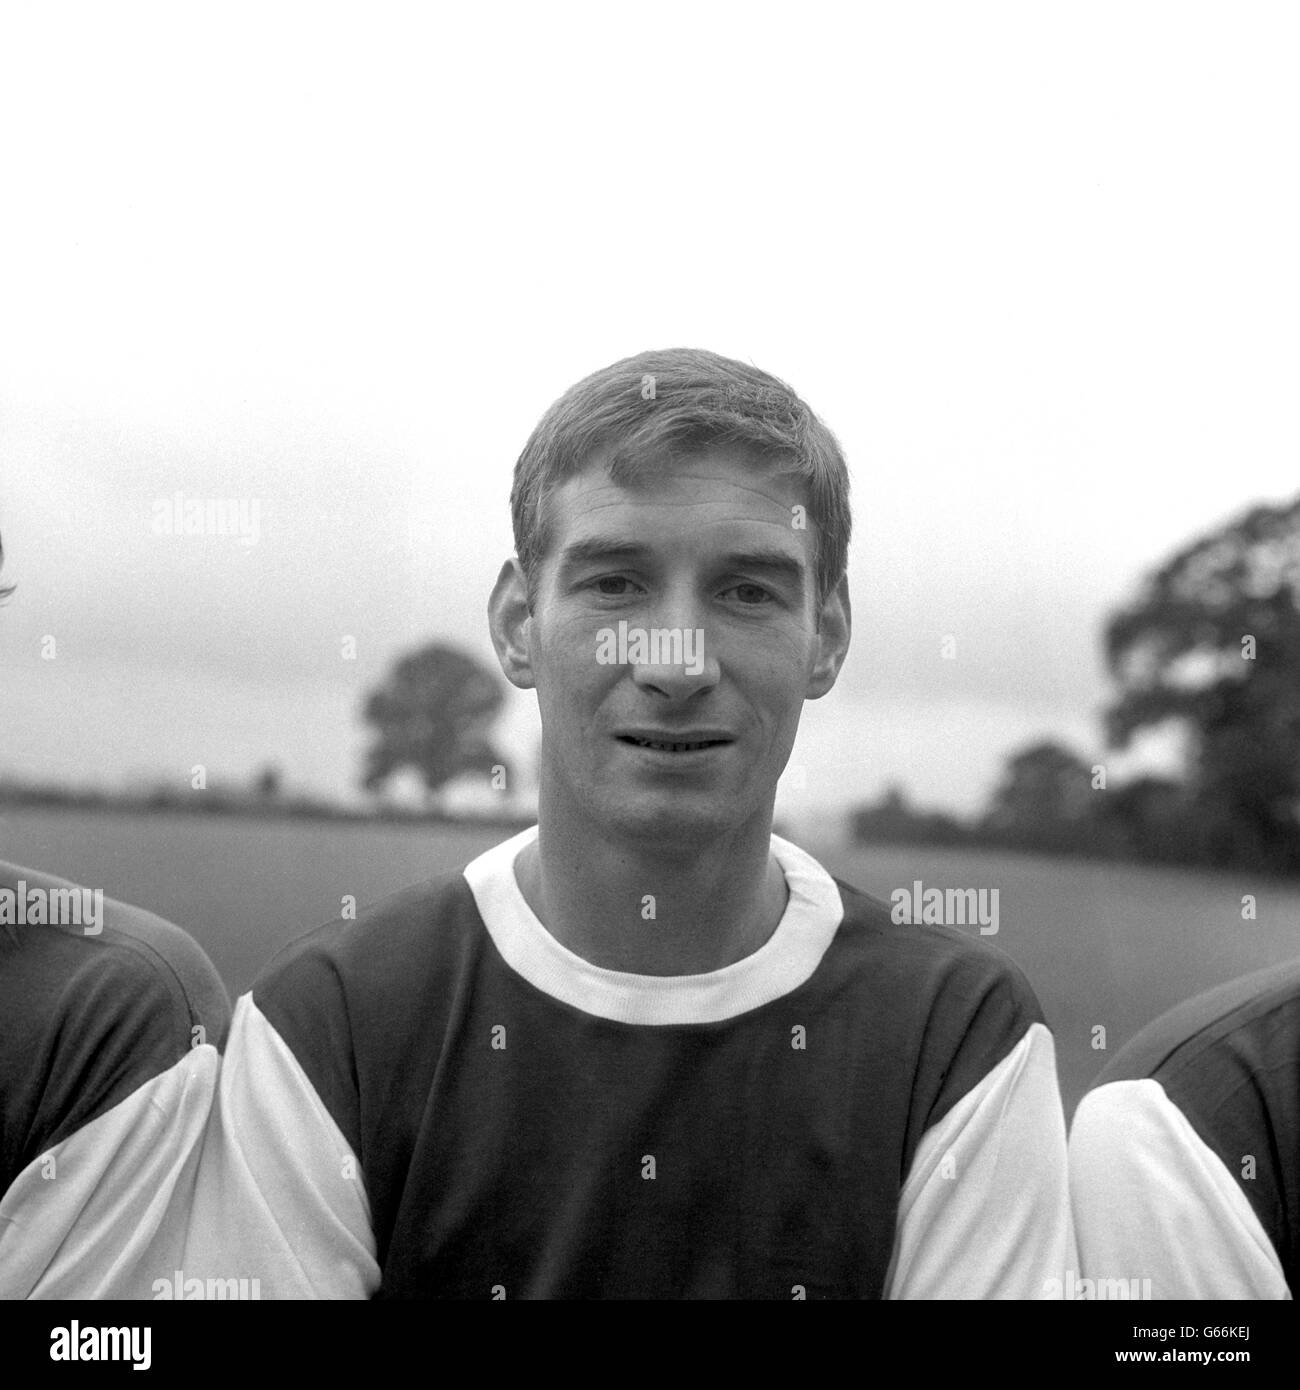 Football - football League Division One - Arsenal Photocall. Geoff Strong, Arsenal. Banque D'Images